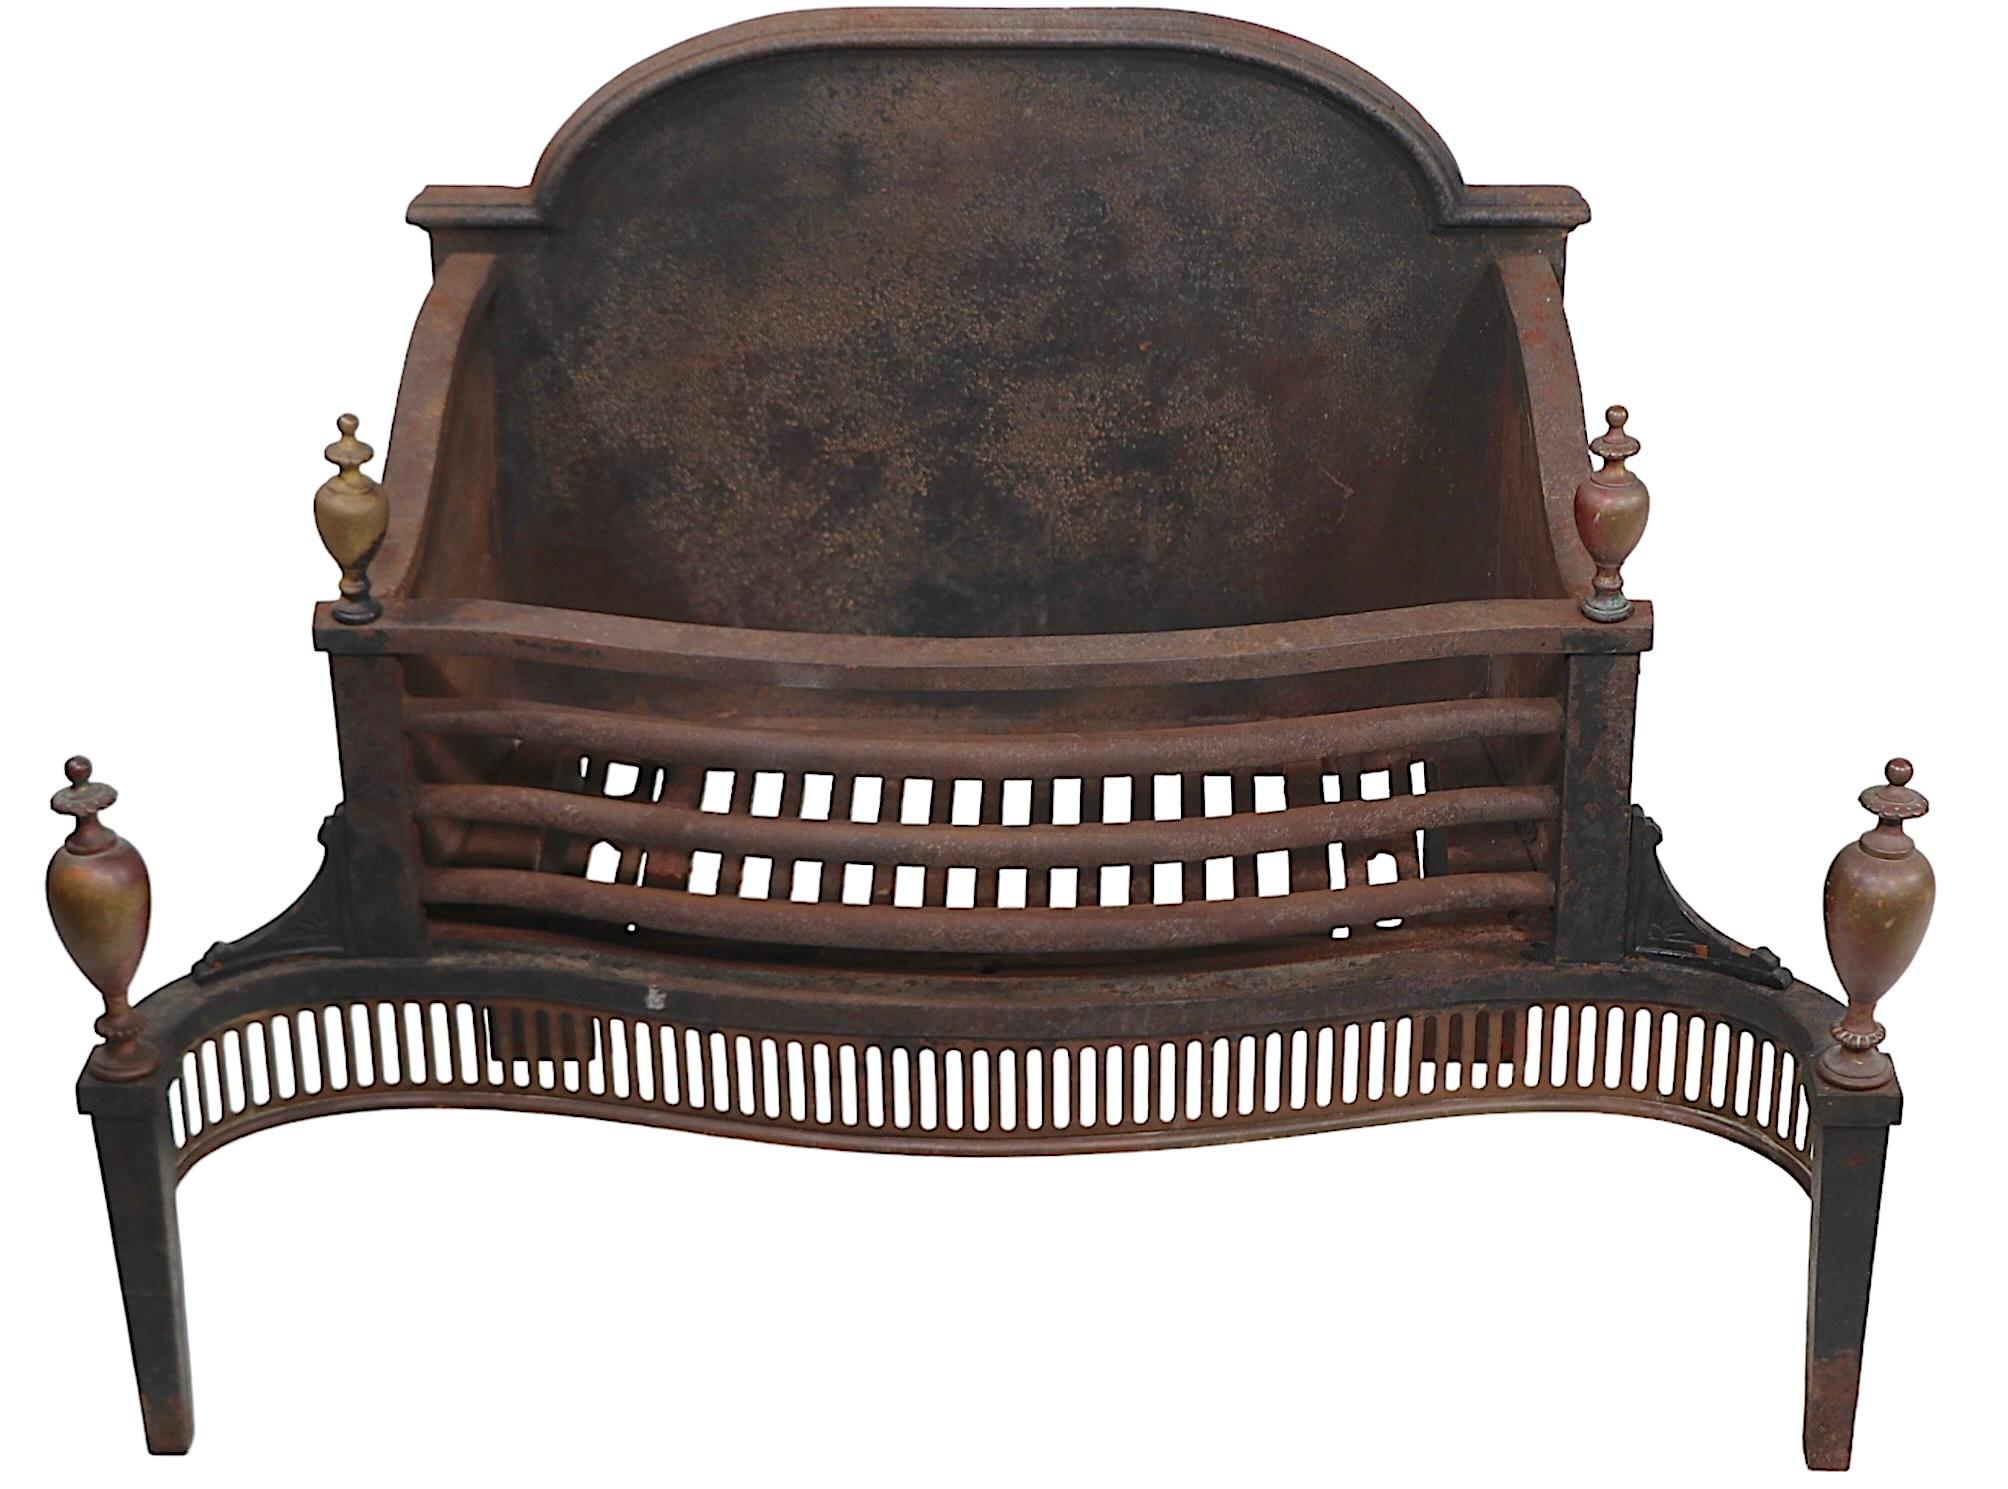 Very nice oversize coal insert grate constructed of cast iron, with decorative brass trim. The grate features a dome top backplate, a  coal, or wood basket, with a pierced brass concave front grill, with  brass legs and finials. This exceptional